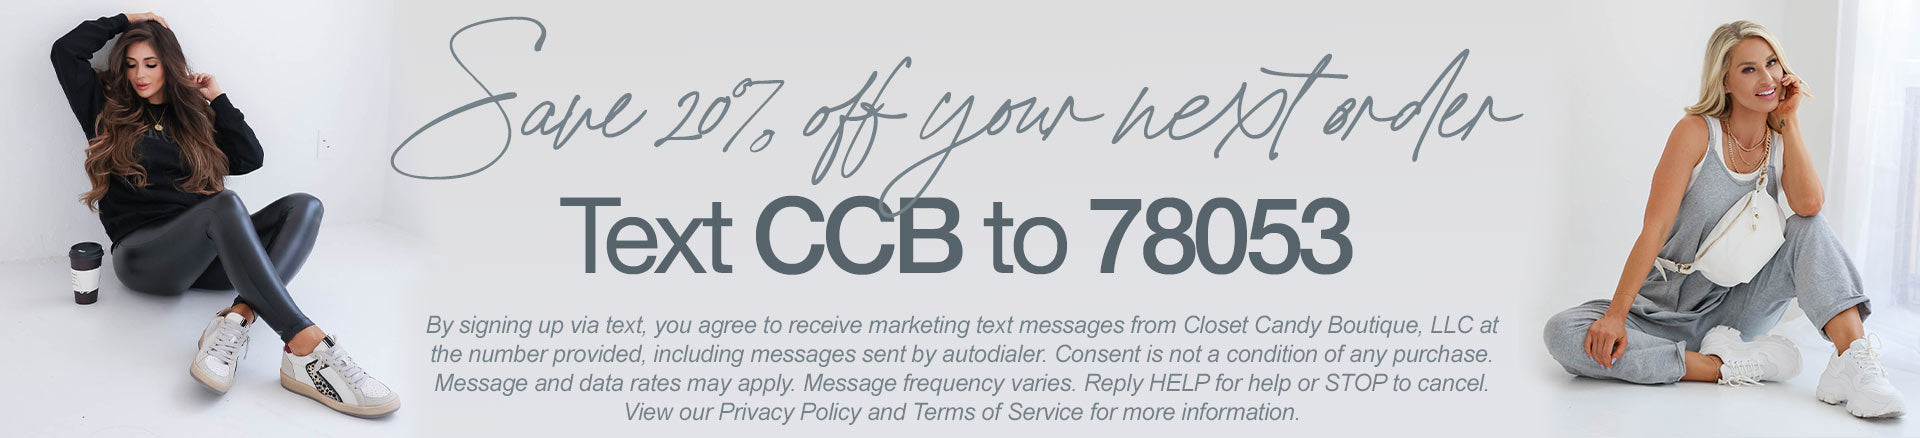 Save 20% Off your next order by joining our text club. Text CCB to 78053 to Join